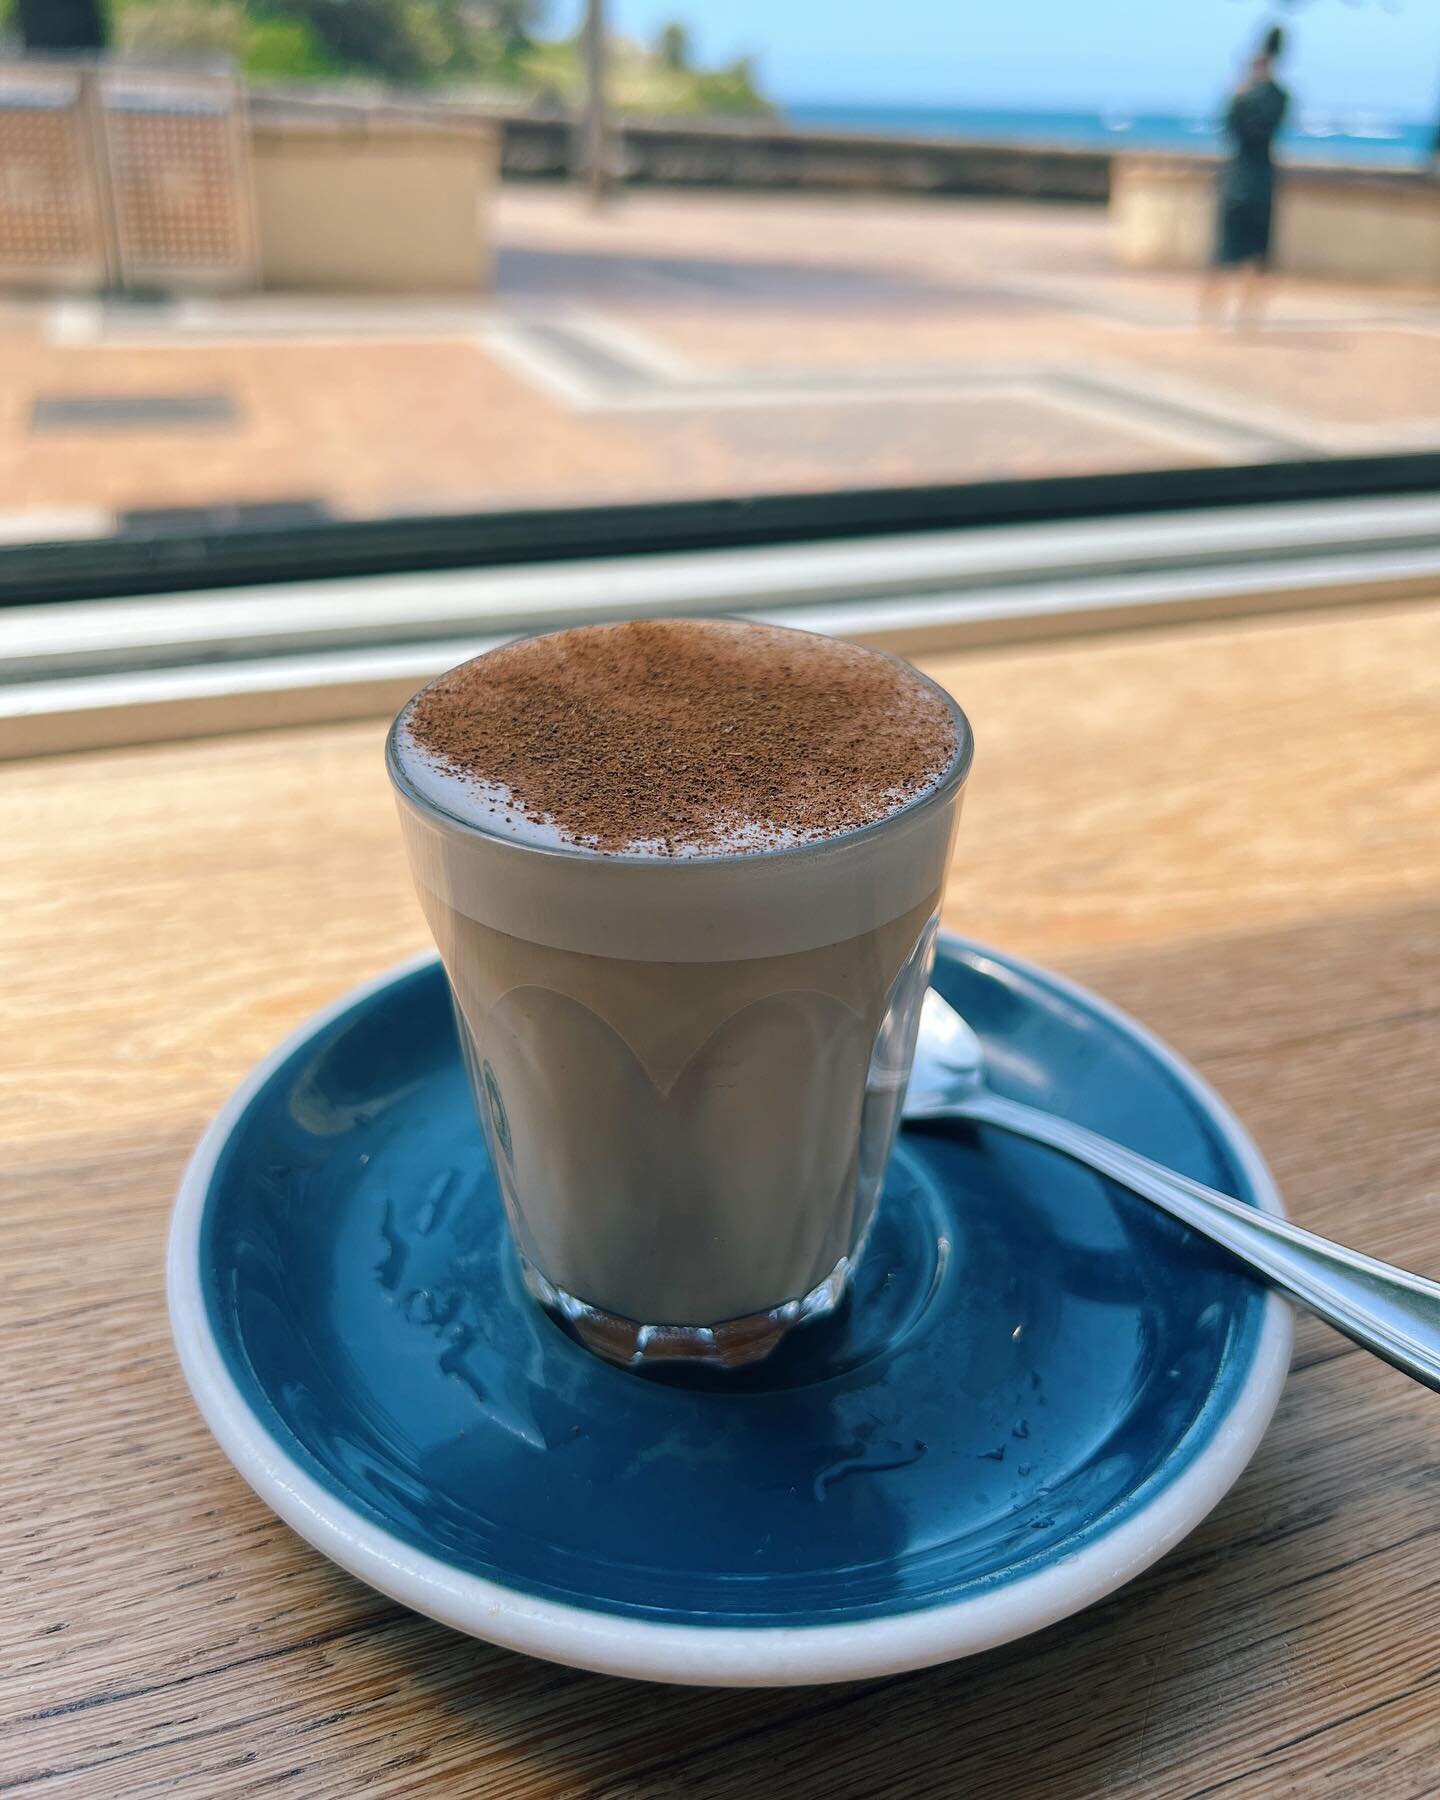 Coogee pavilion and morning glory cafe are staples if you&rsquo;re visiting Sydney (and especially two stops you should make before you embark on the coastal walk which is exactly what I did!! Could&rsquo;ve hung out at both places all day!) the chai